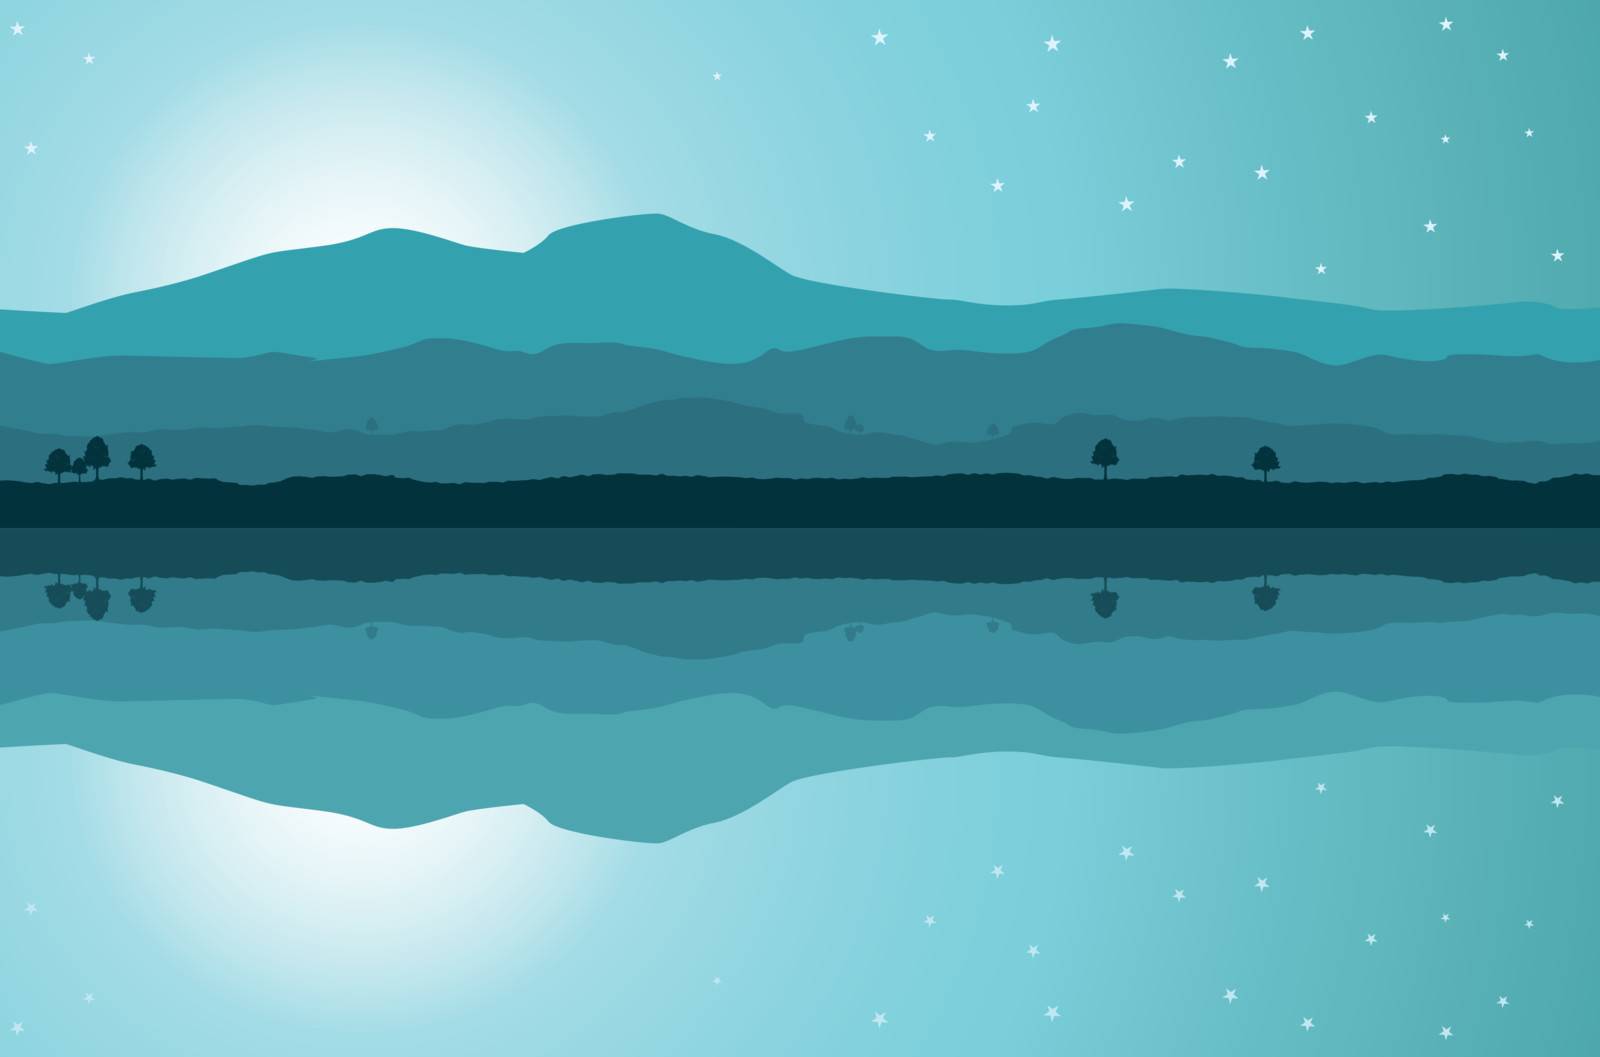 A vector landscape in teal tones, next to a lake, with water reflection. Editable illustration.